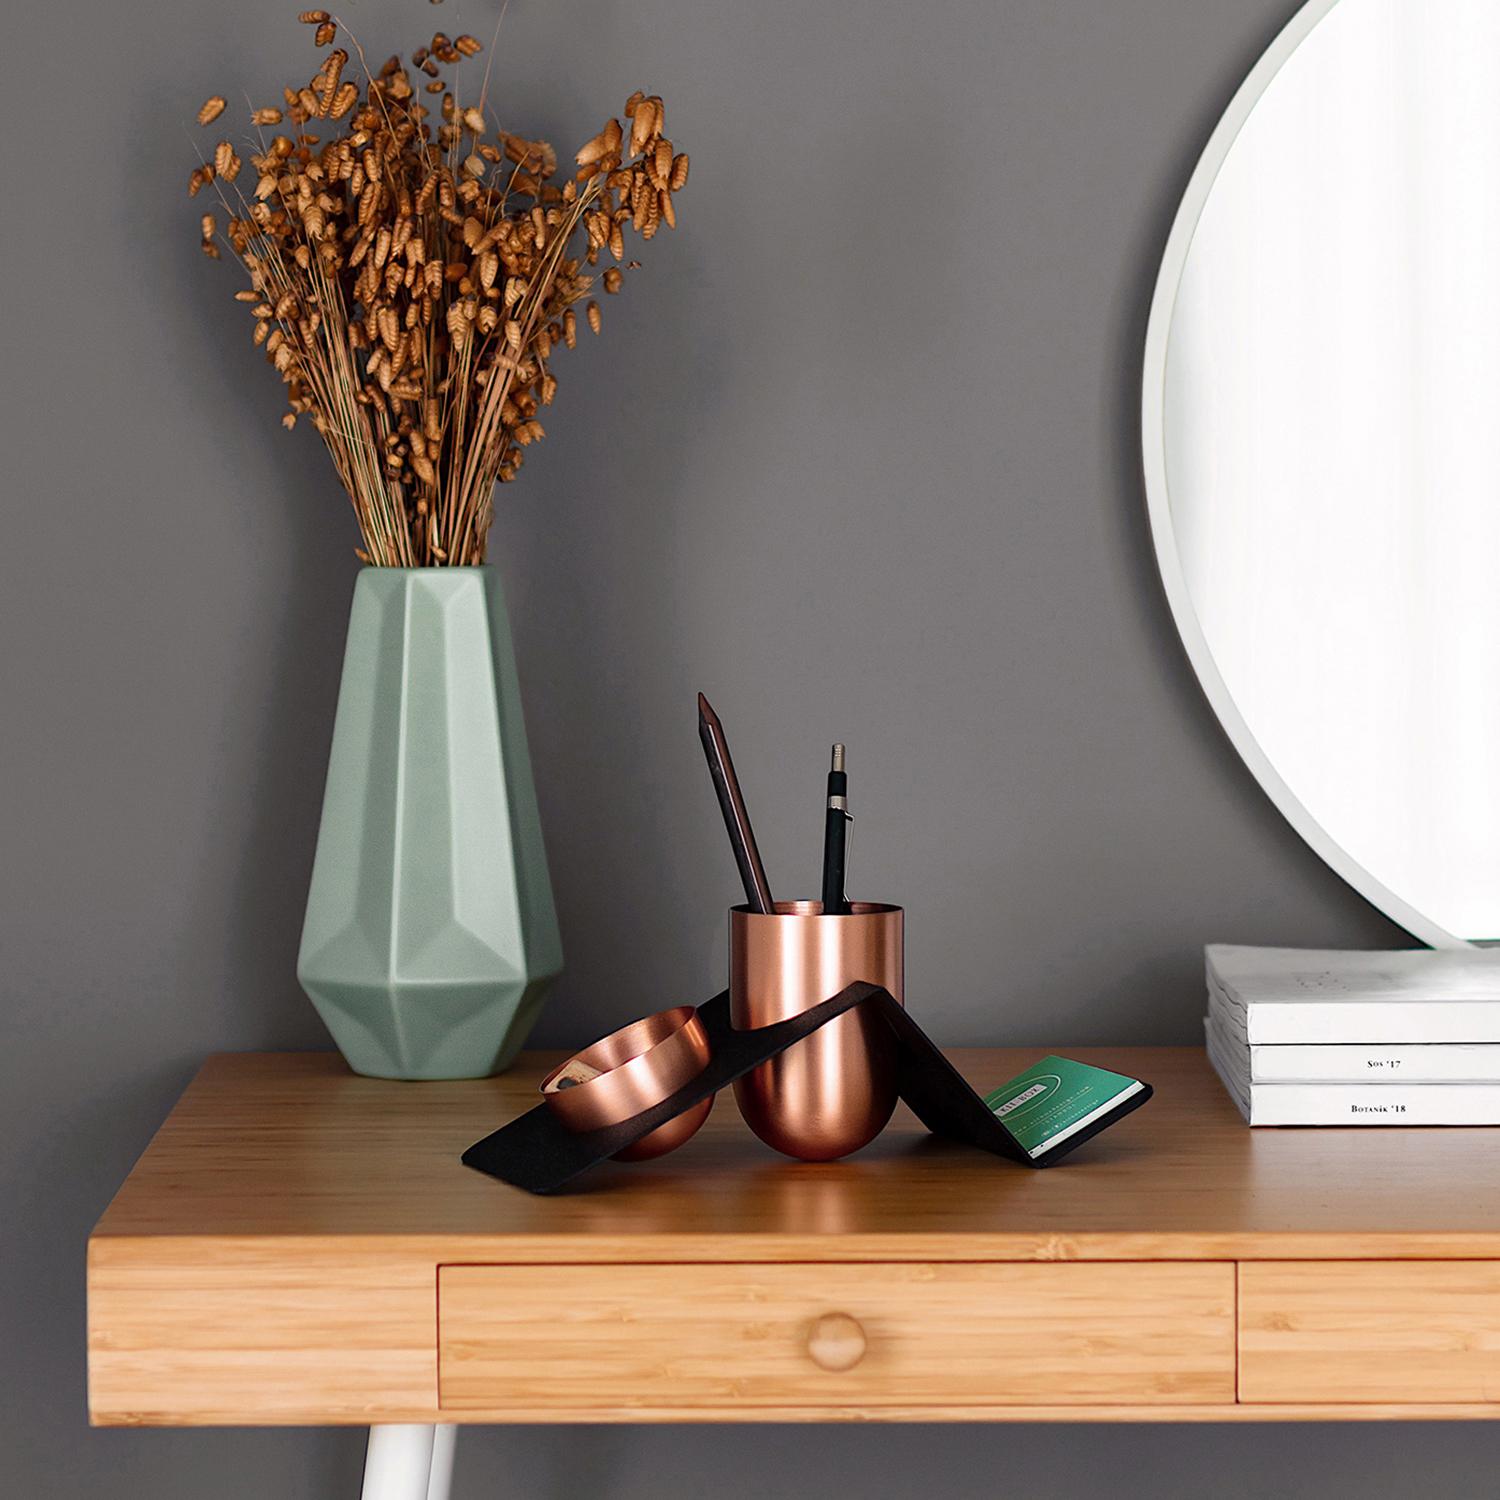 Blank Pen is a stylish and fun way of organizing your work desk. The brass or copper containers are designed in a way that cannot stand on their feet and therefore needs a little bit support from the metal stand that joins them all.

While the pen